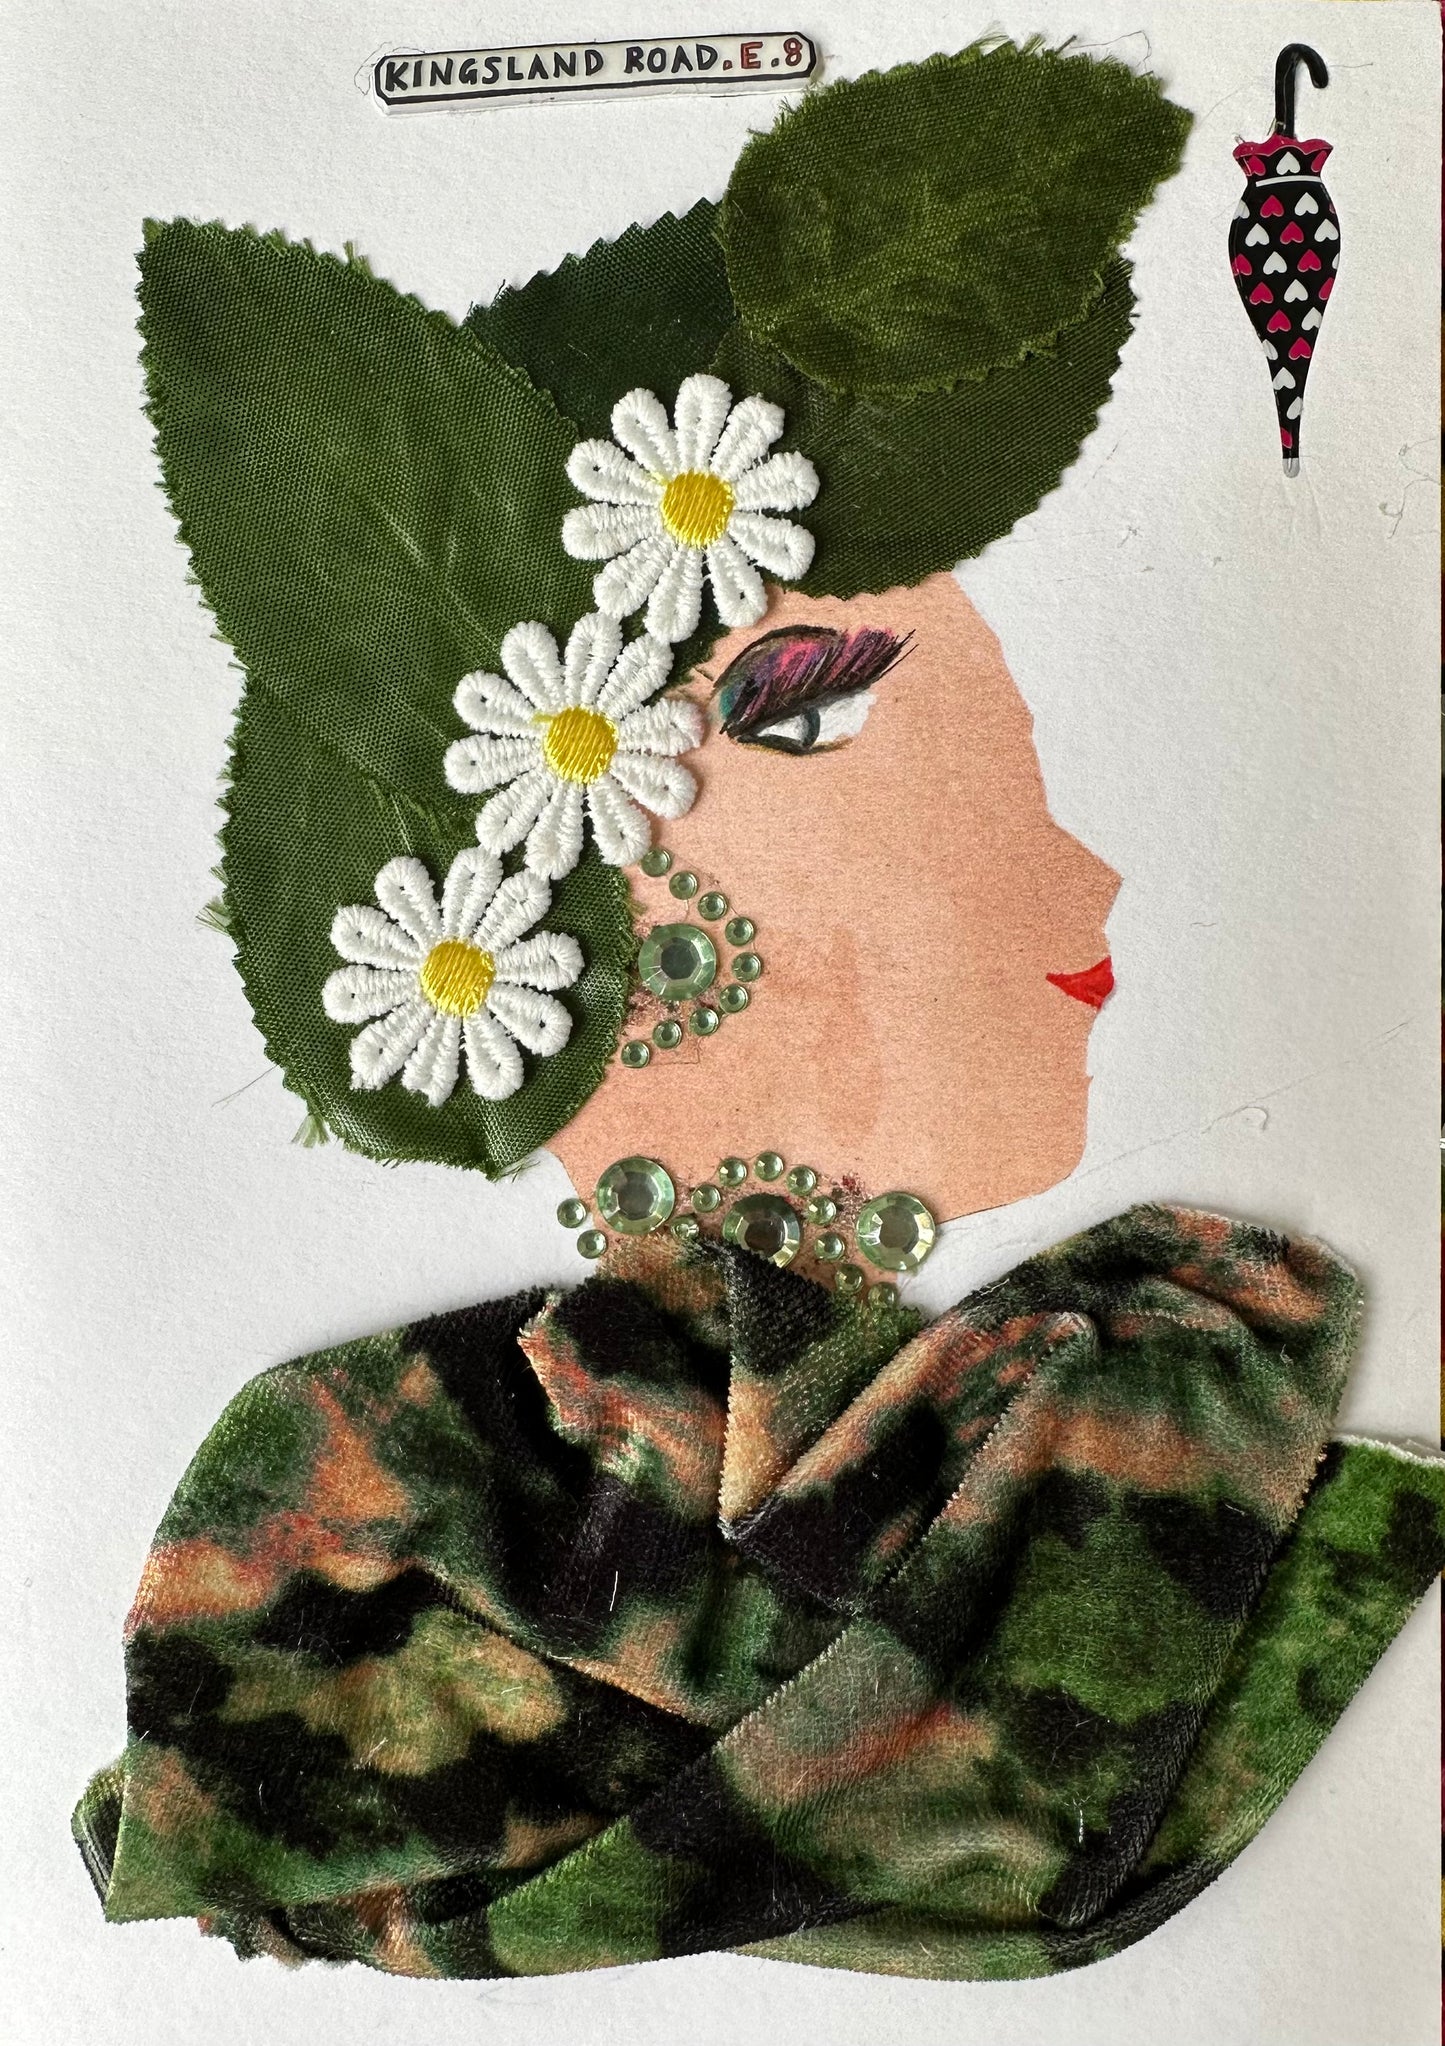 I made this handmade card of a woman dressed in a green top that has hints of orange. The outfit is complimented by matching green gemstone earrings and a necklace. In her hair, there are green leaves and daisies. 